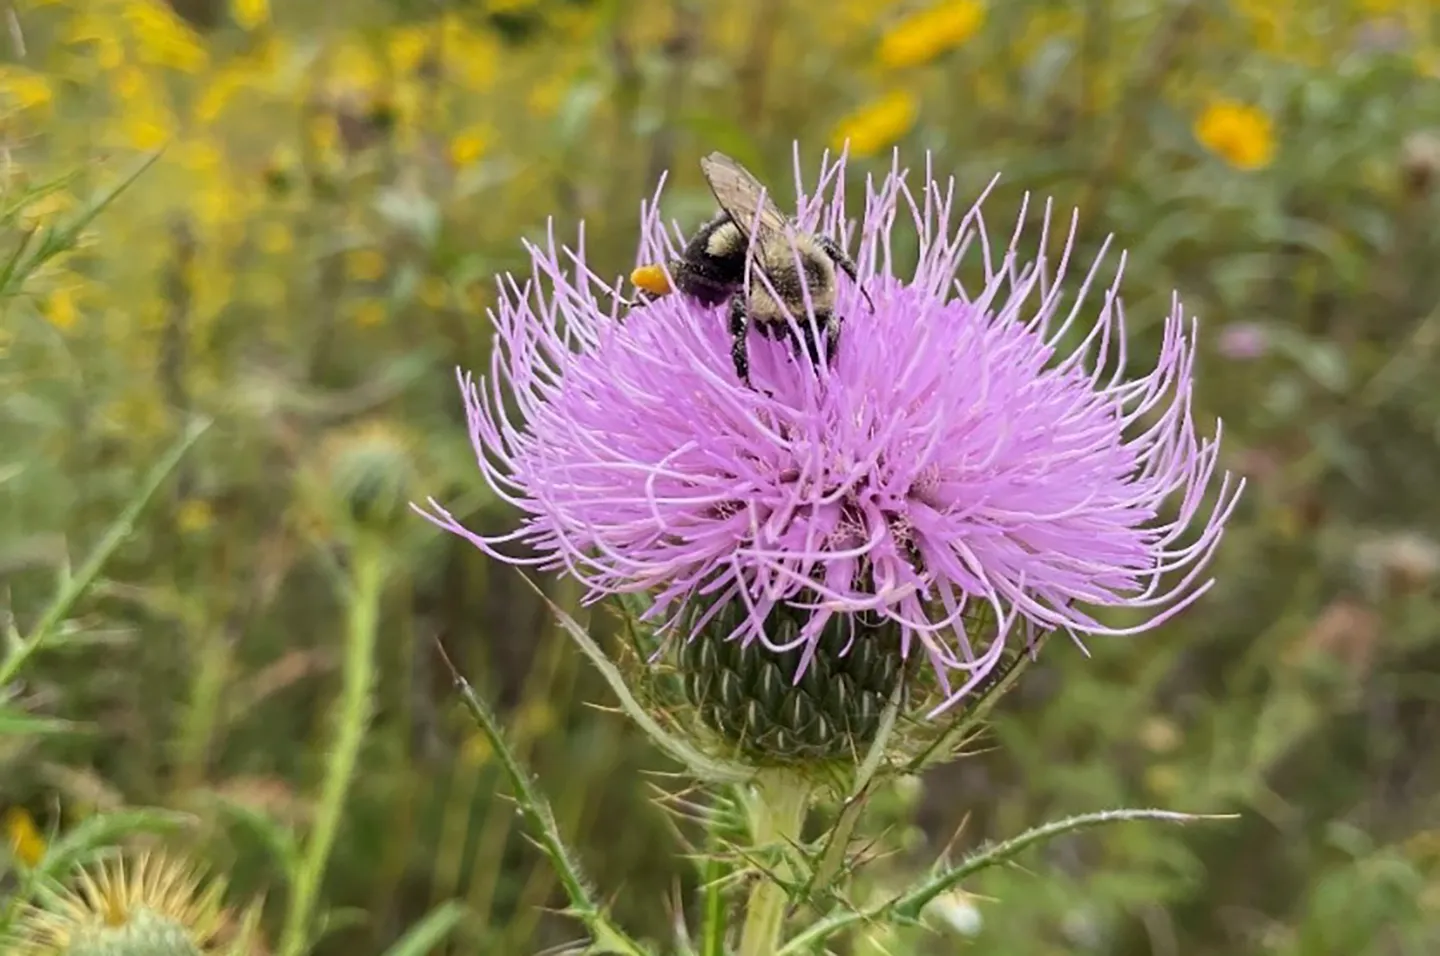 Bumble bee feasting on field thistle nectar (Cirsium discolor).